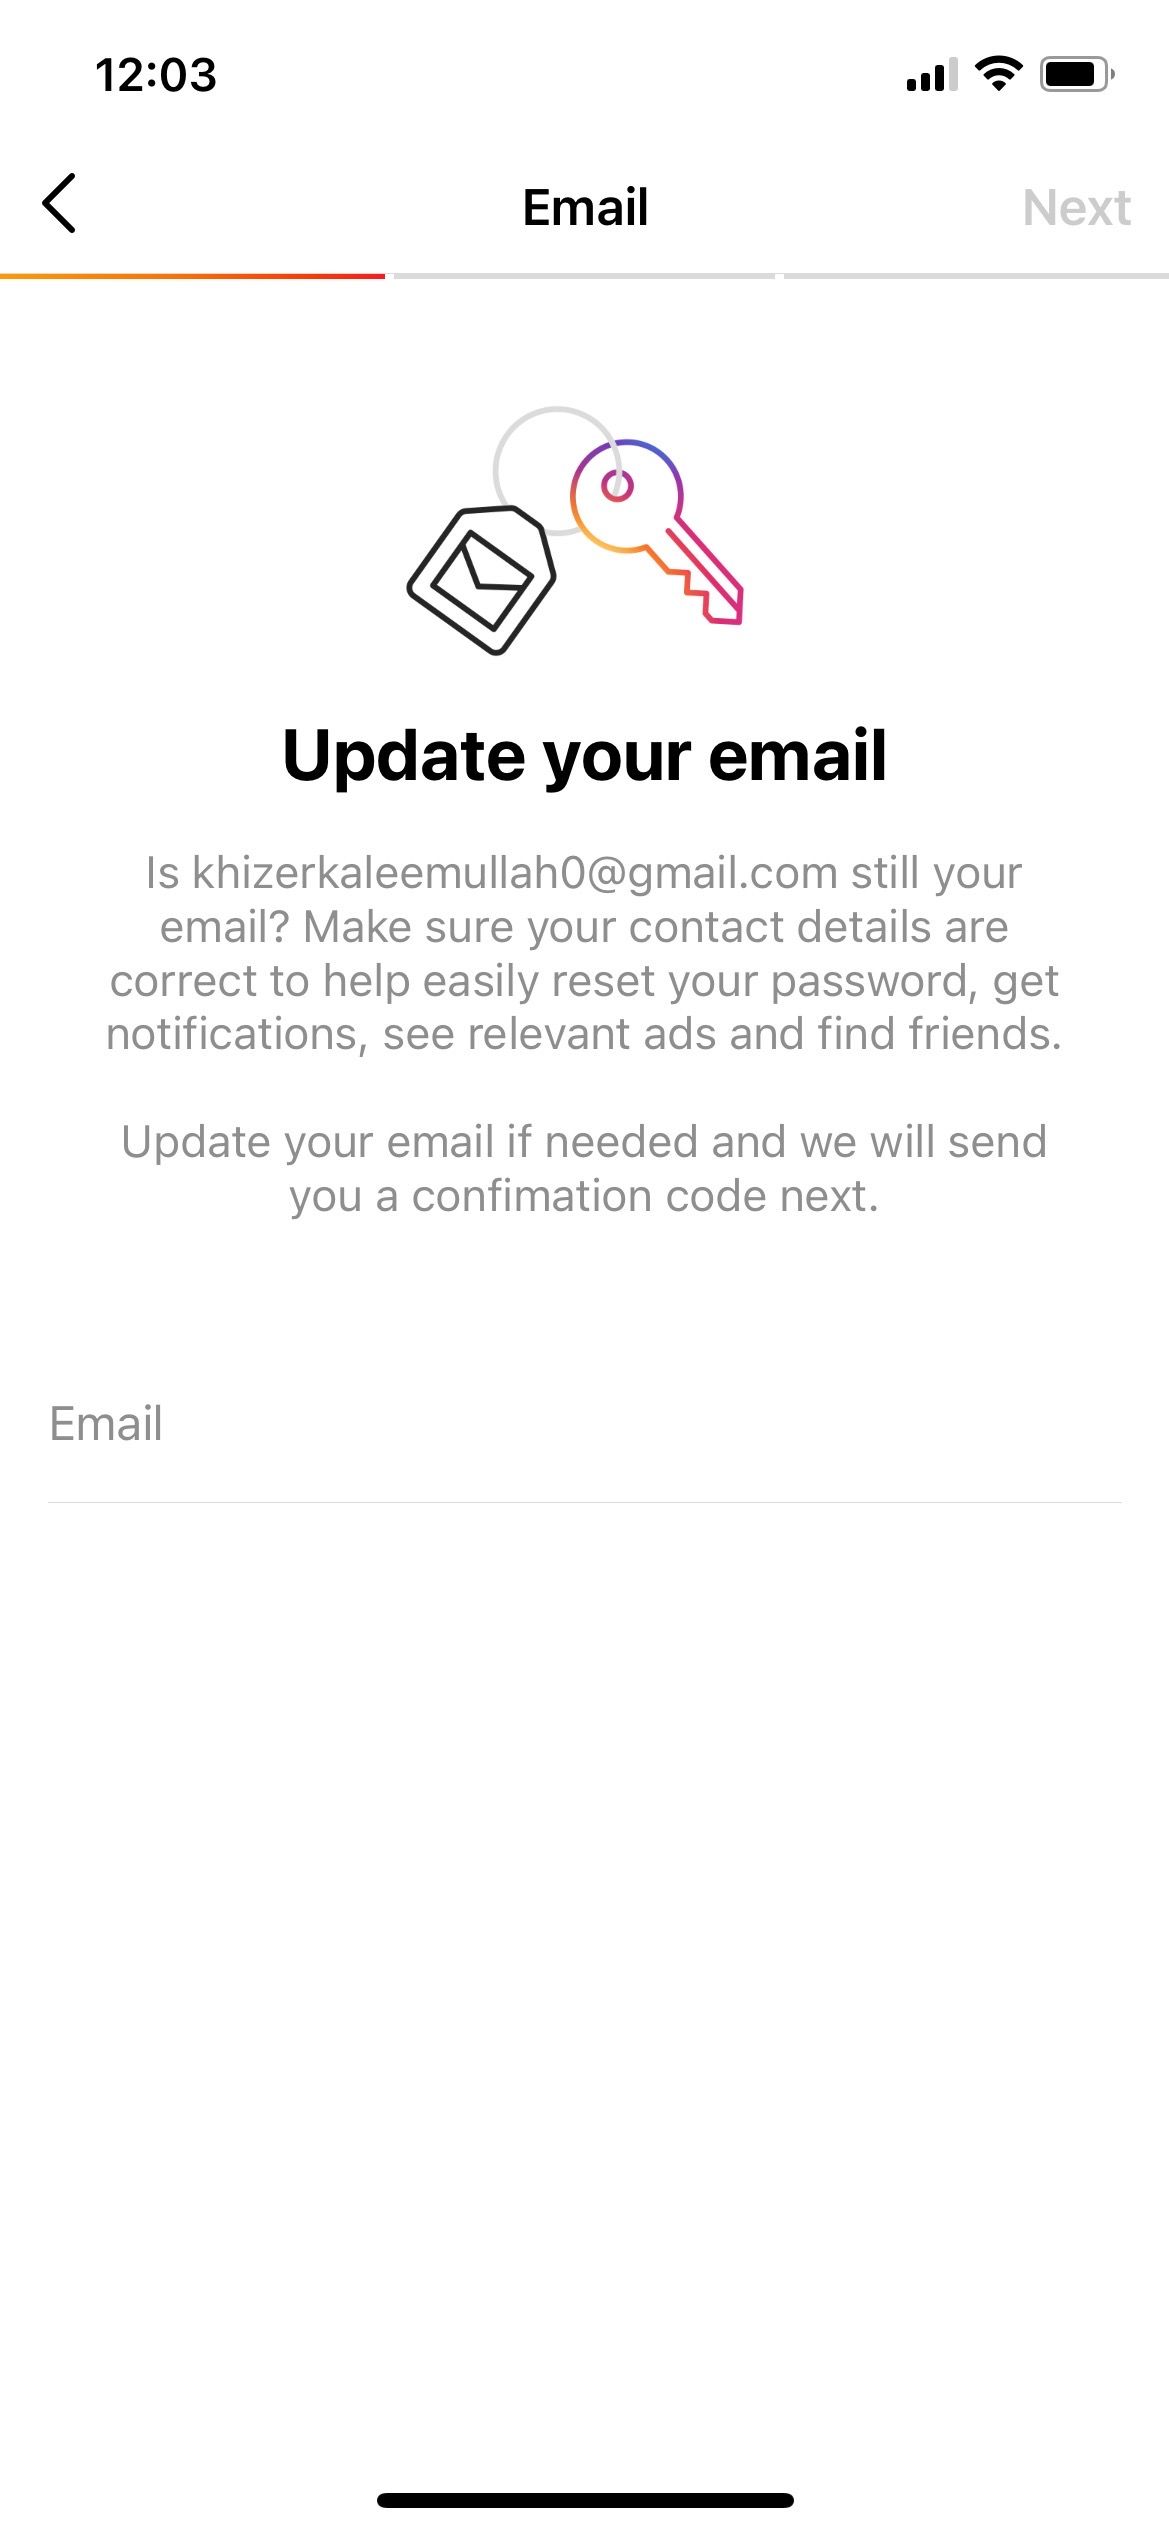 Update your email on Instagram